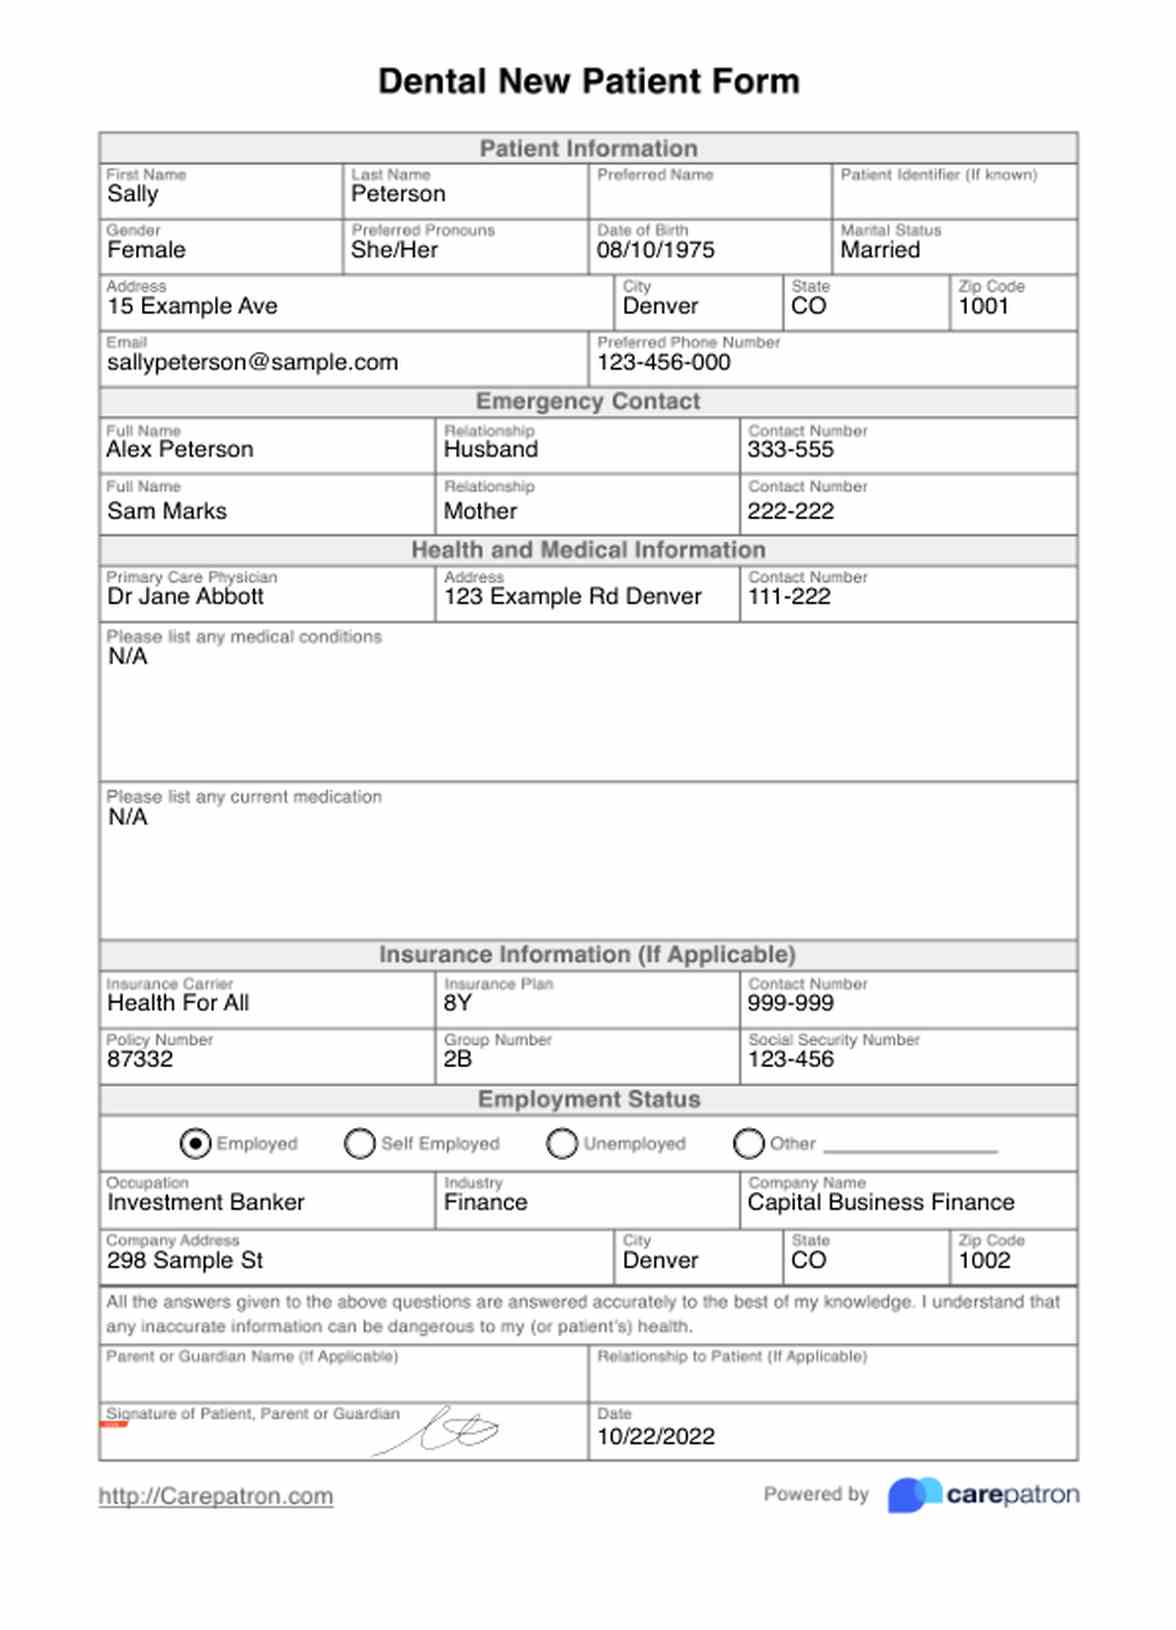 Dental New Patient Form PDF Example